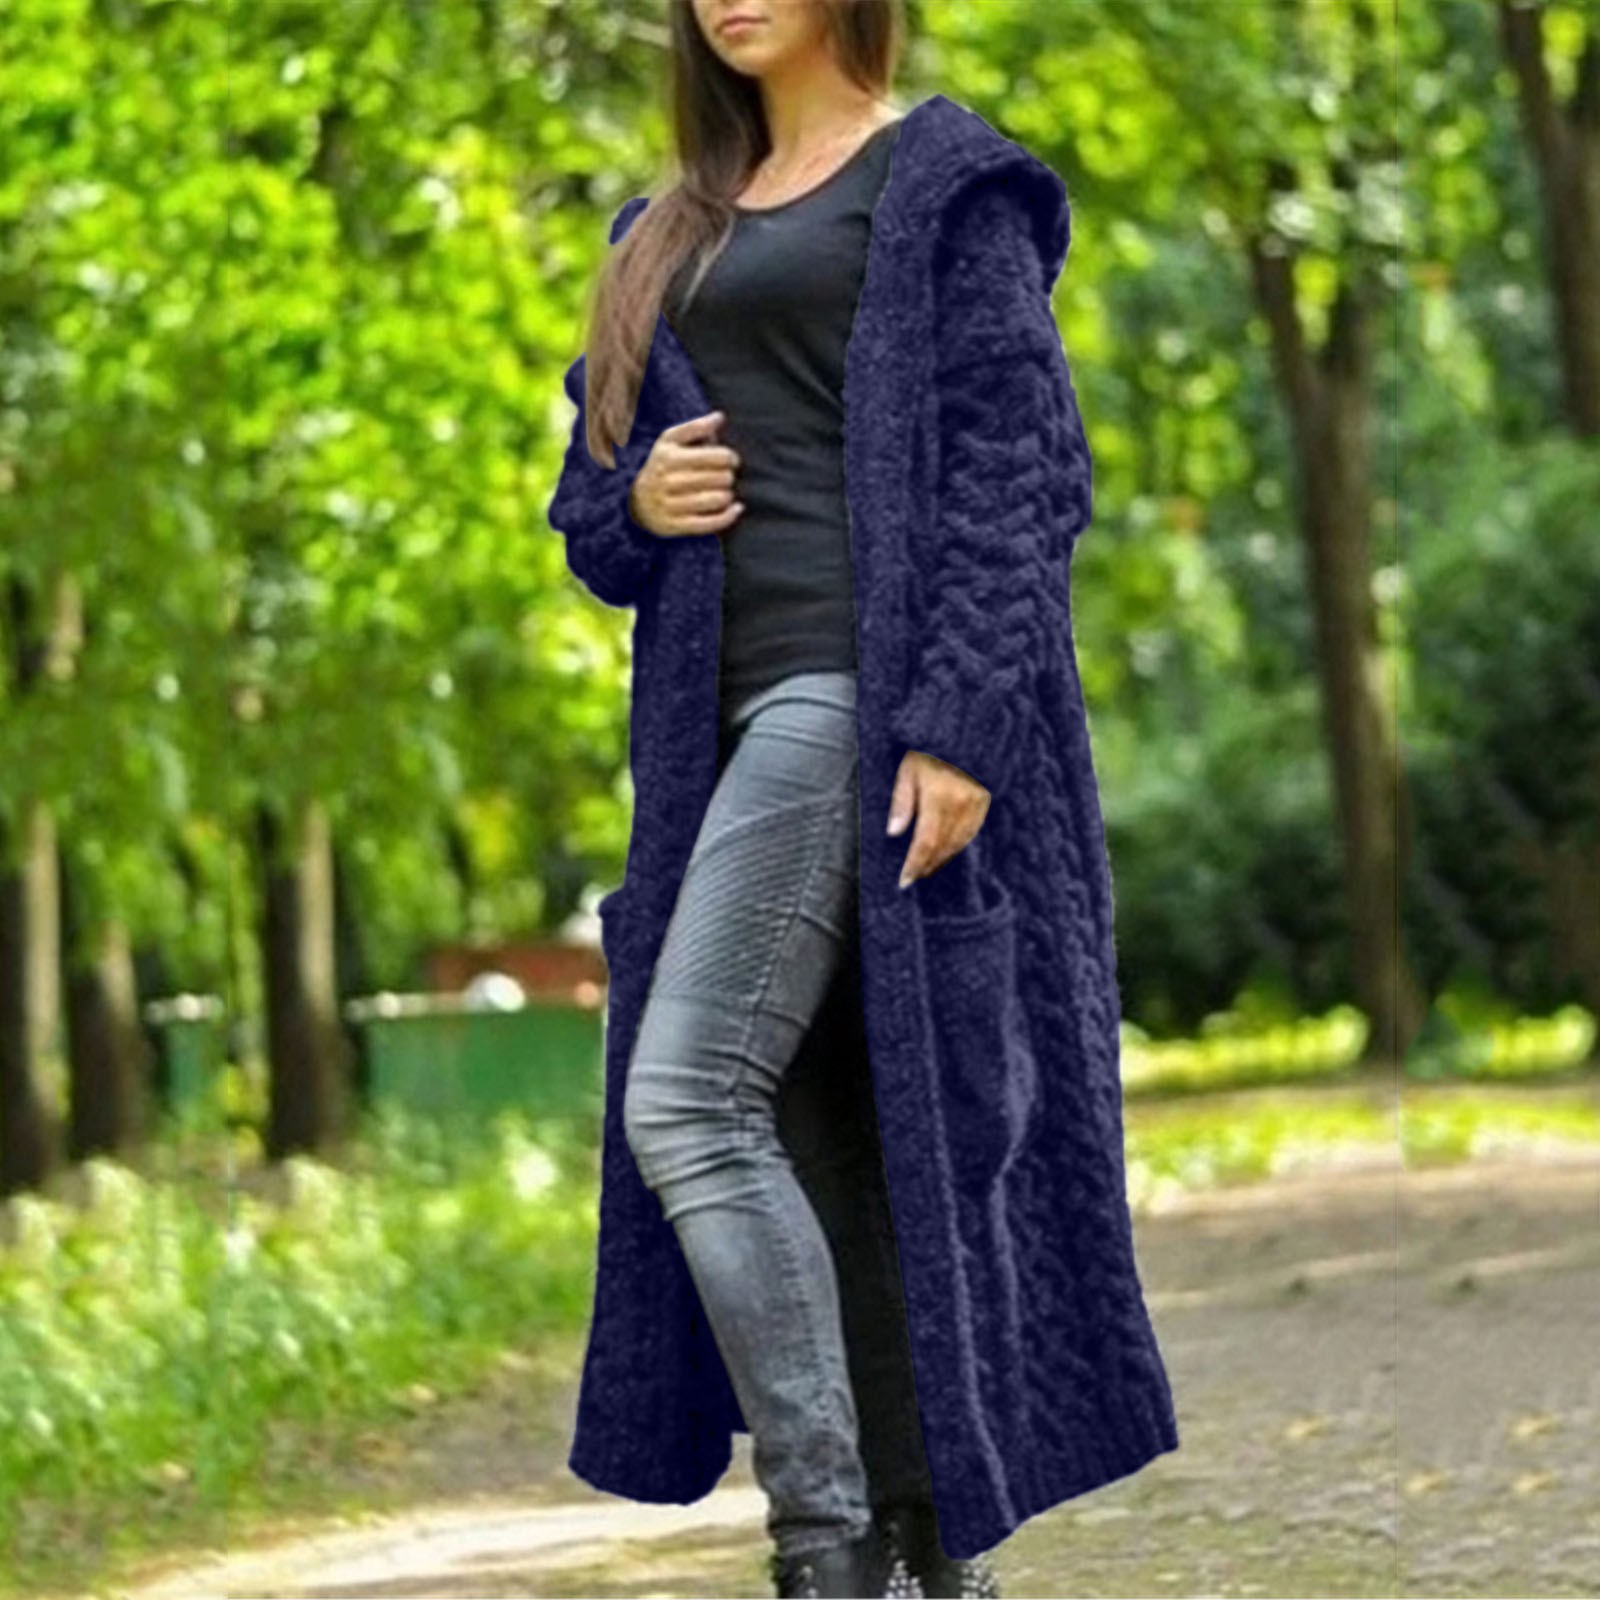 UPPADA Casual Jackets for Women Women's Winter Coat Warm Puffer jacket Plus Size Sherpa Lined Coats Batwing Cable Knitted Slouchy Wrap Cardigan Abrigos de Mujer - image 4 of 6